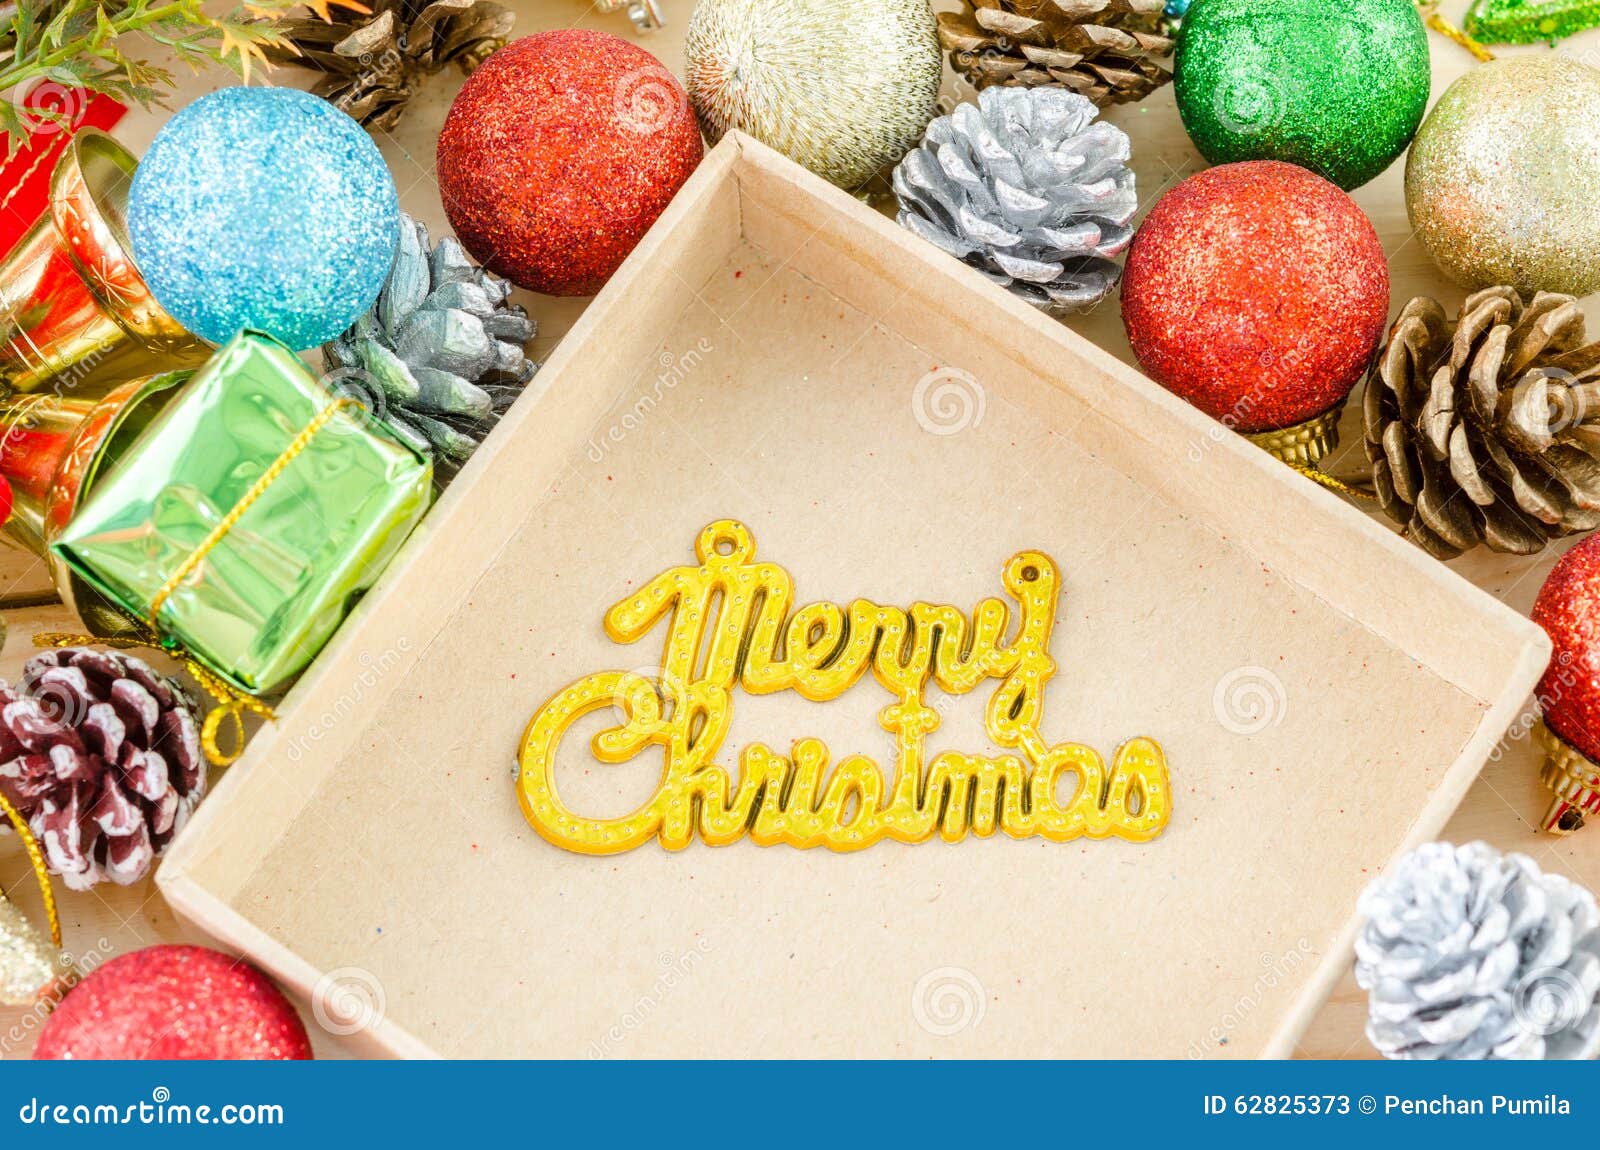 The Words Merry Christmas with Christmas Decorations. Stock Image